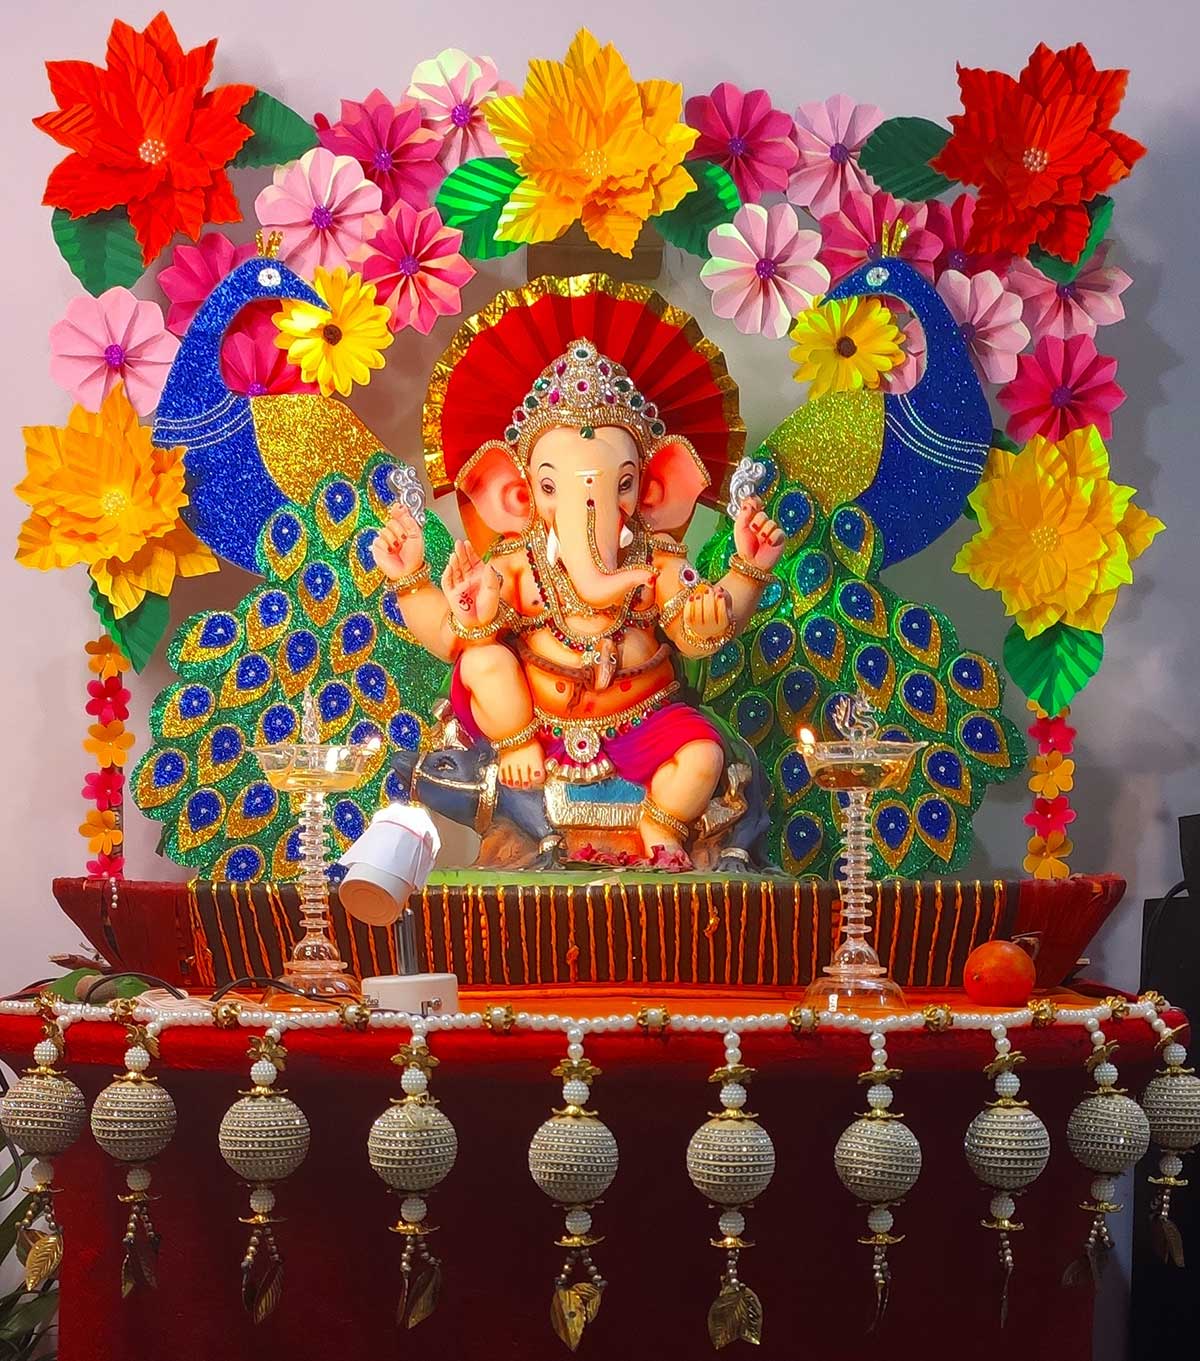 Lord Ganesha has a special place in our heart' - Rediff.com